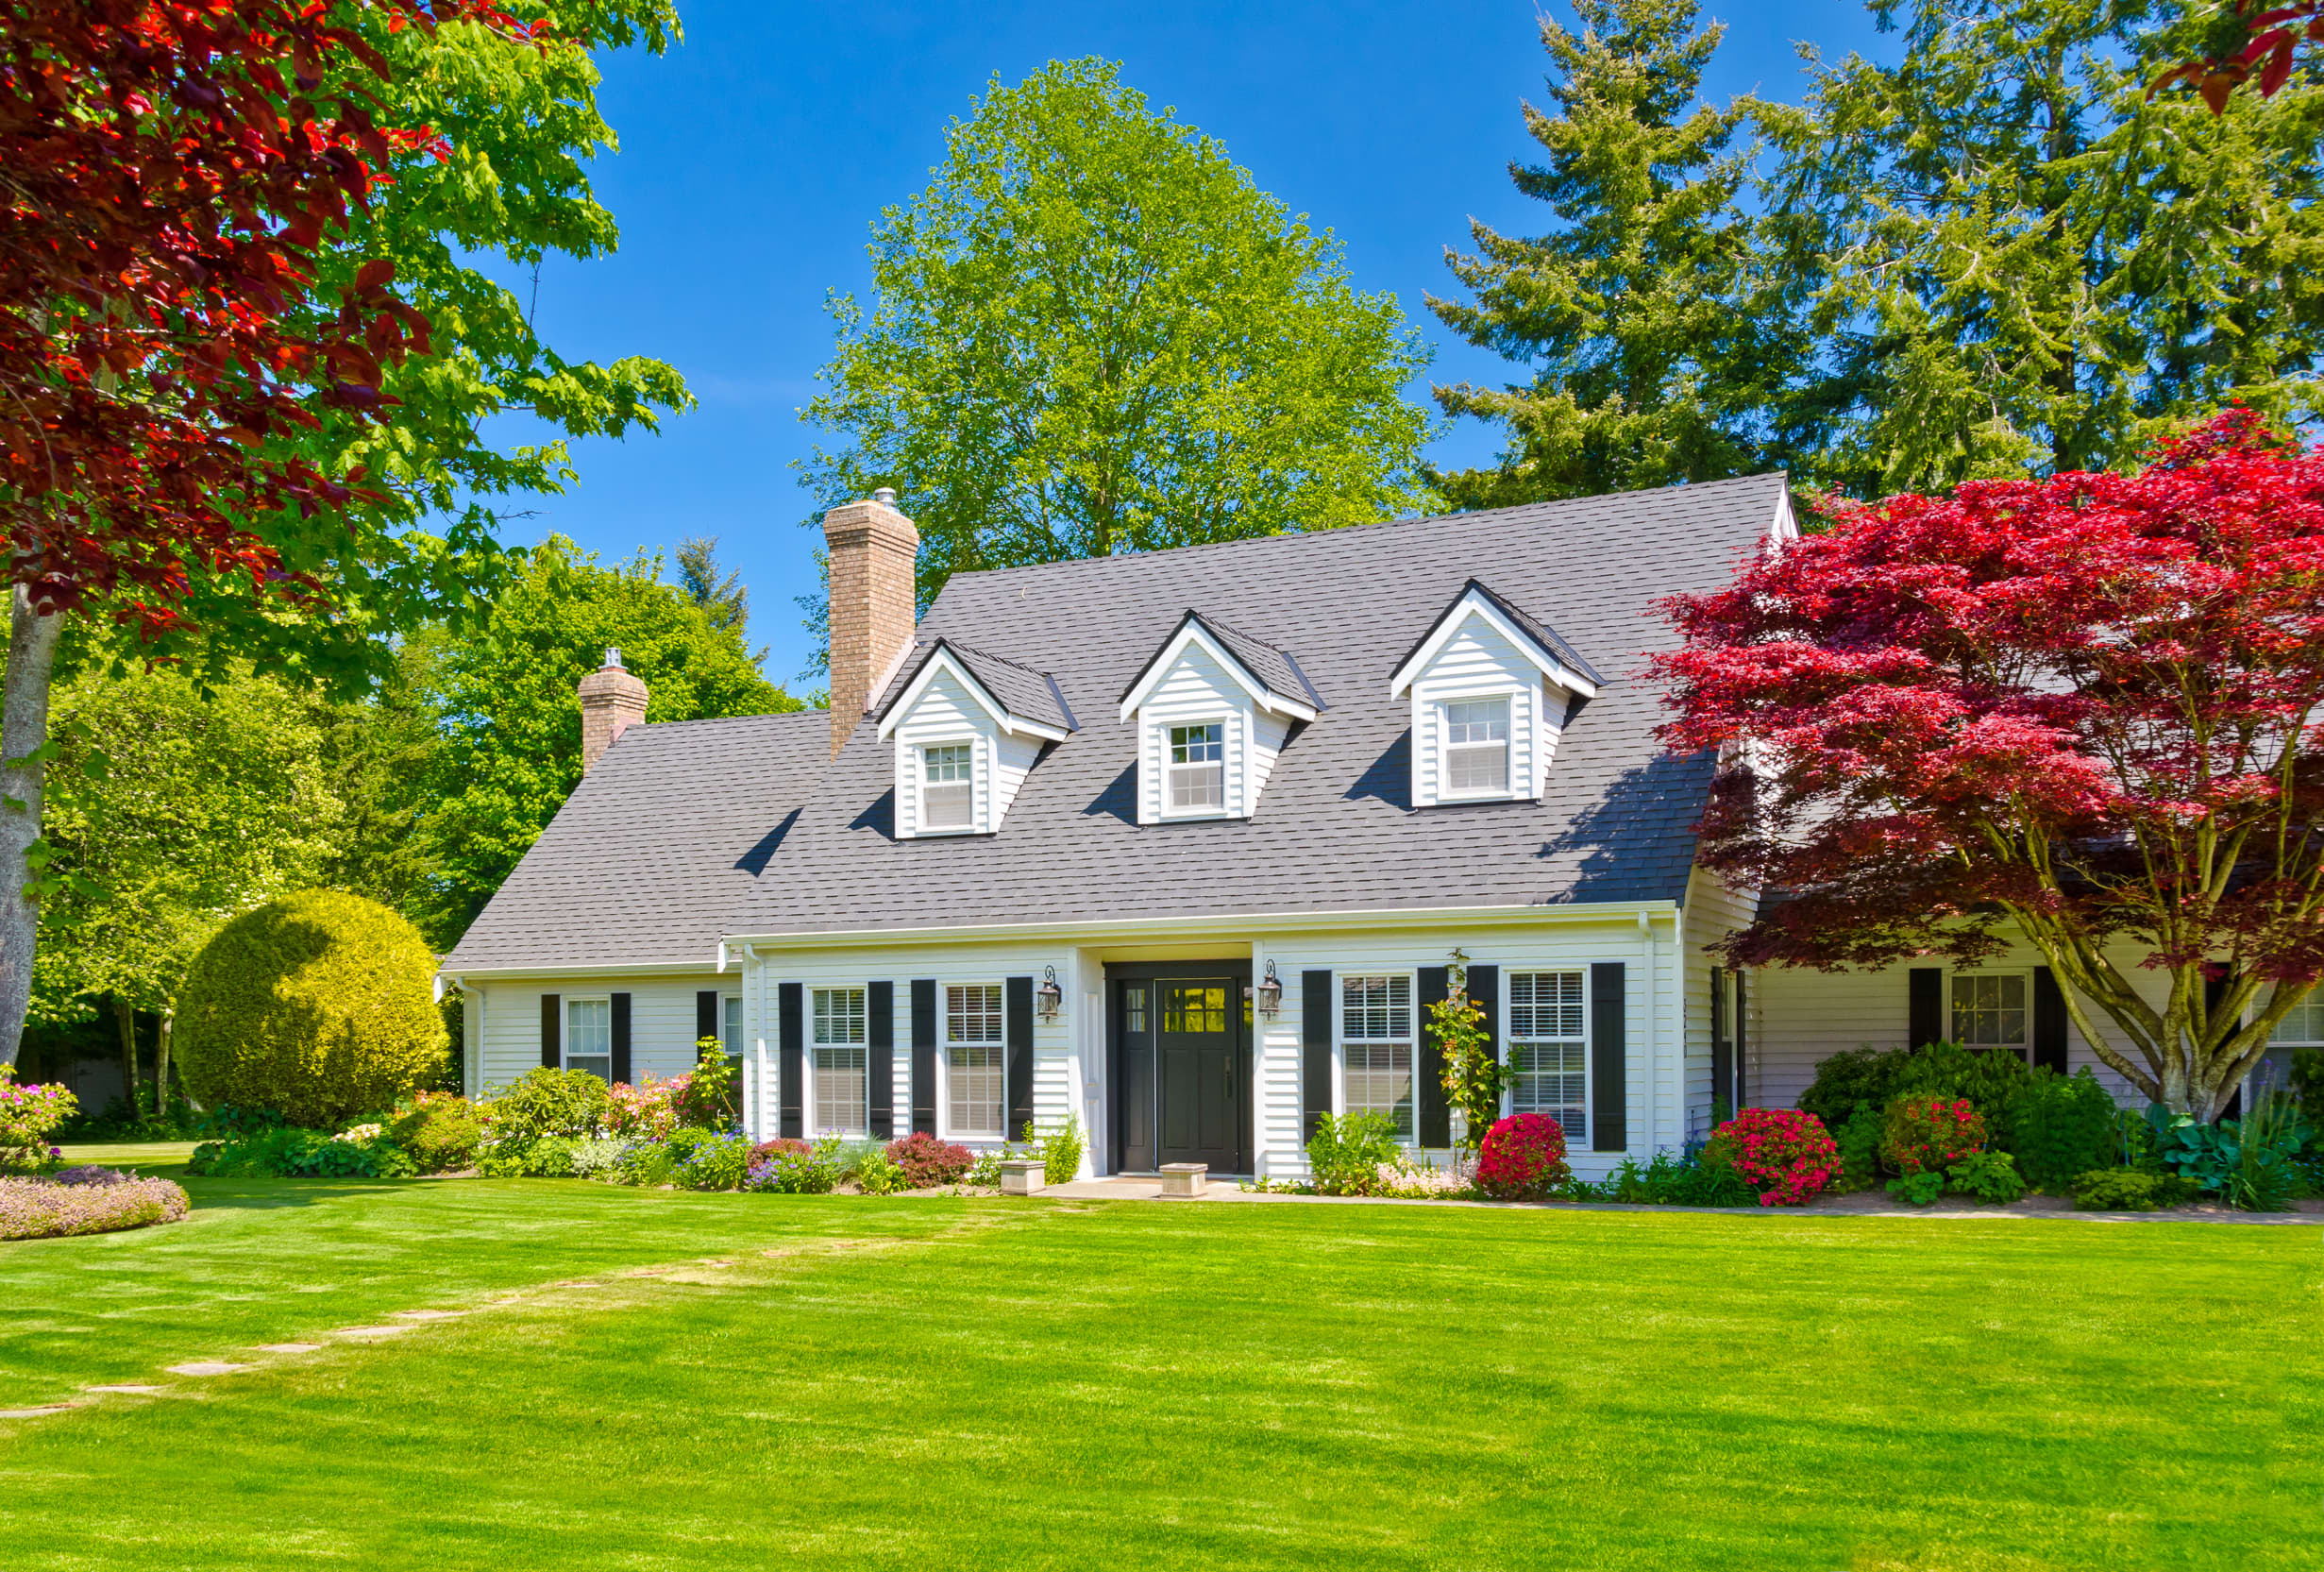 The Pros and Cons of a Cape Cod-Style House